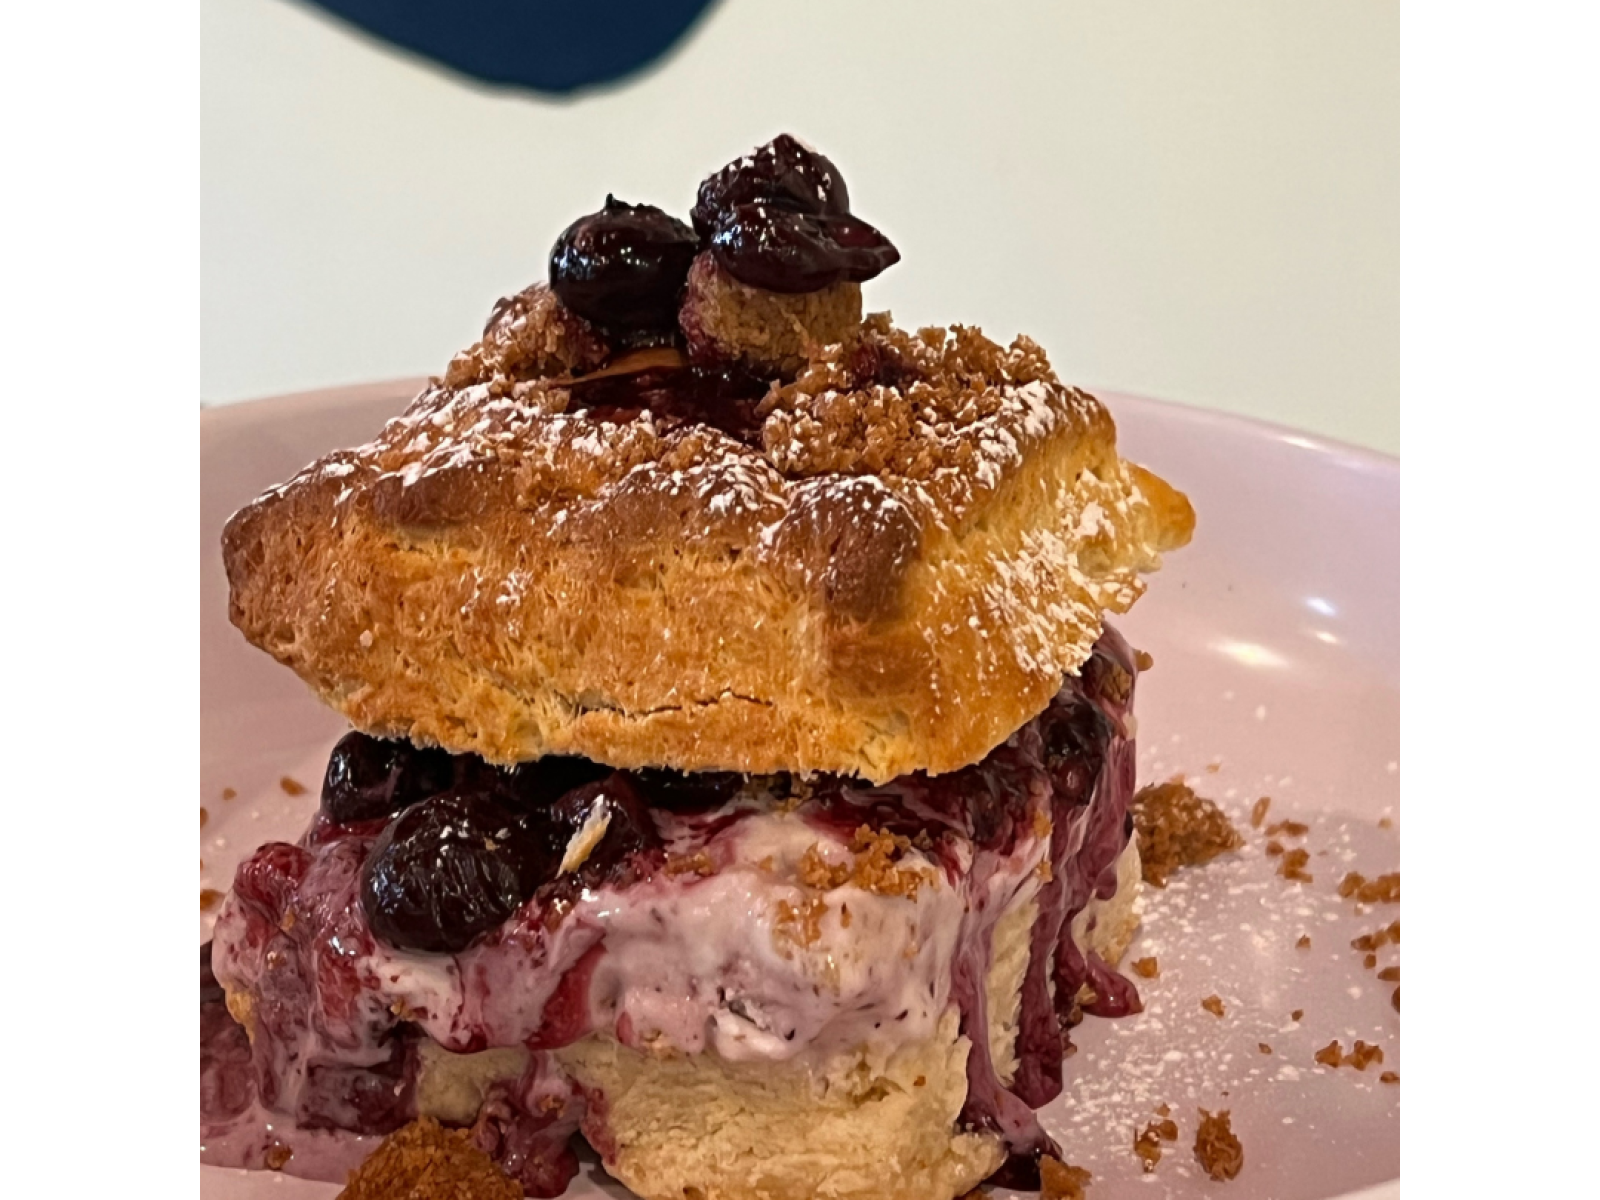 A biscuit ice cream sandwich with blueberry sauce, graham crackers, Marionberry Ice Cream, and blueberries